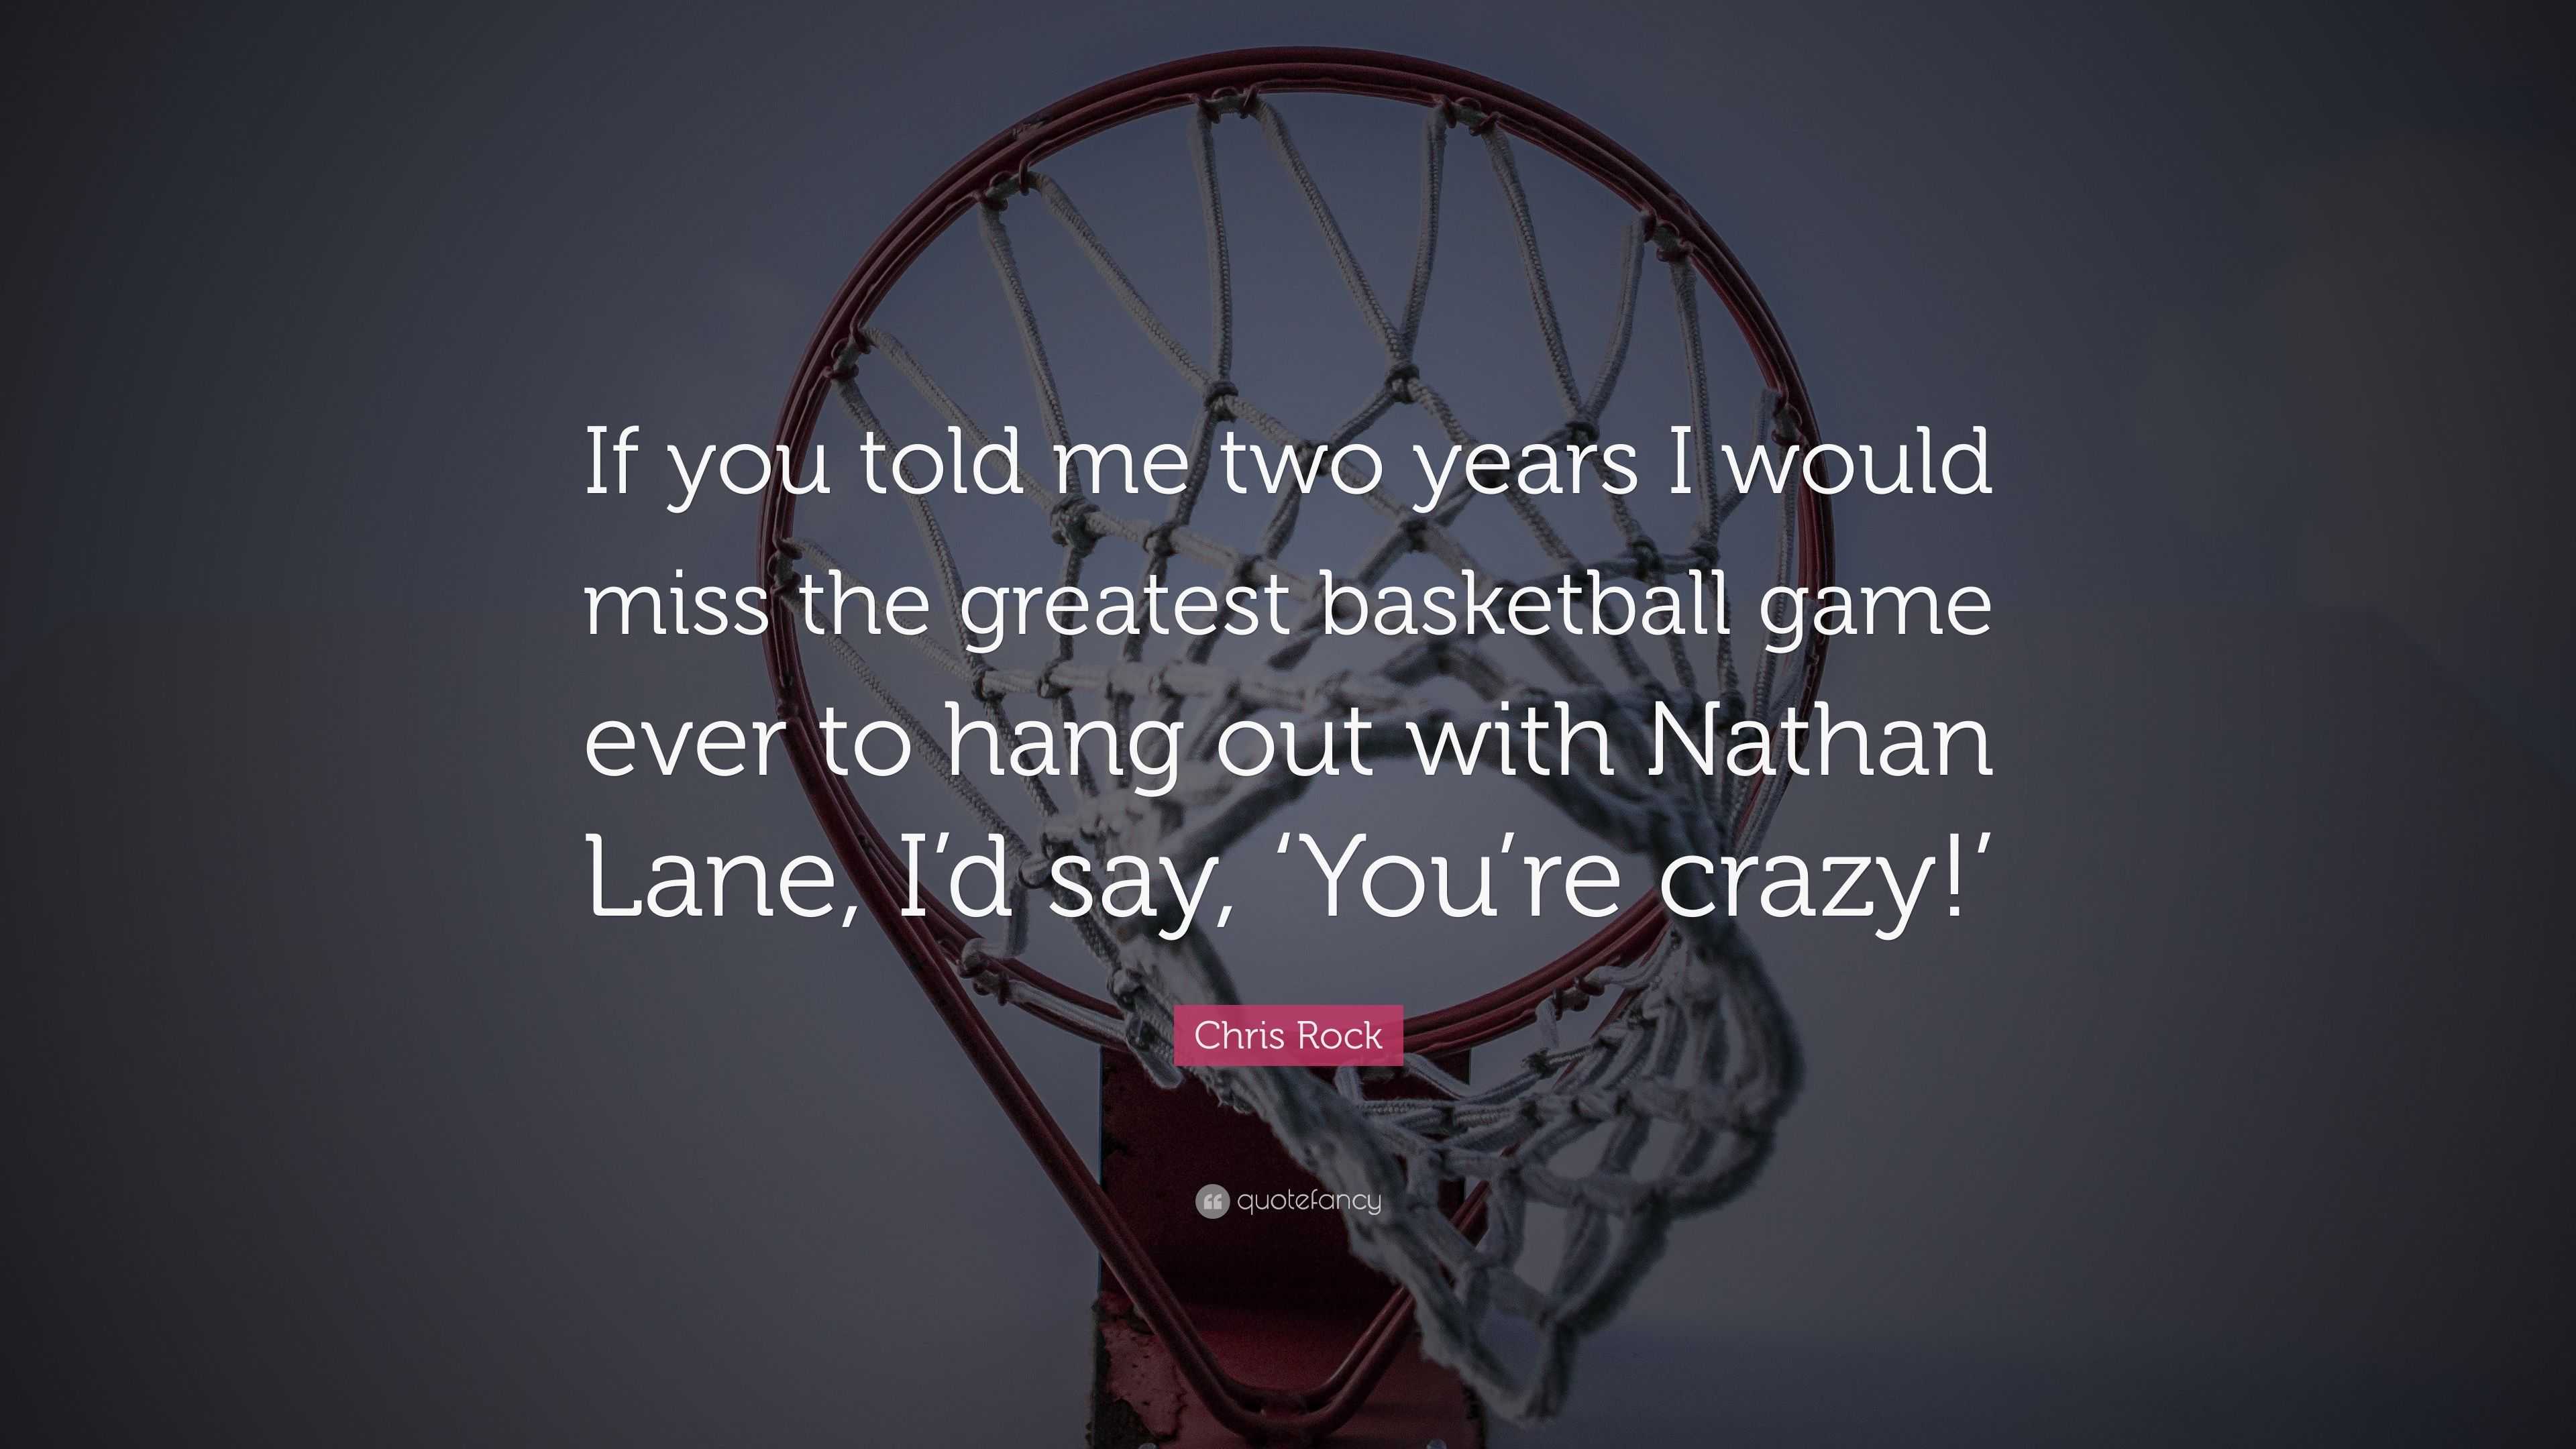 Chris Rock Quote If You Told Me Two Years I Would Miss The Greatest Basketball Game Ever To Hang Out With Nathan Lane I D Say You Re C